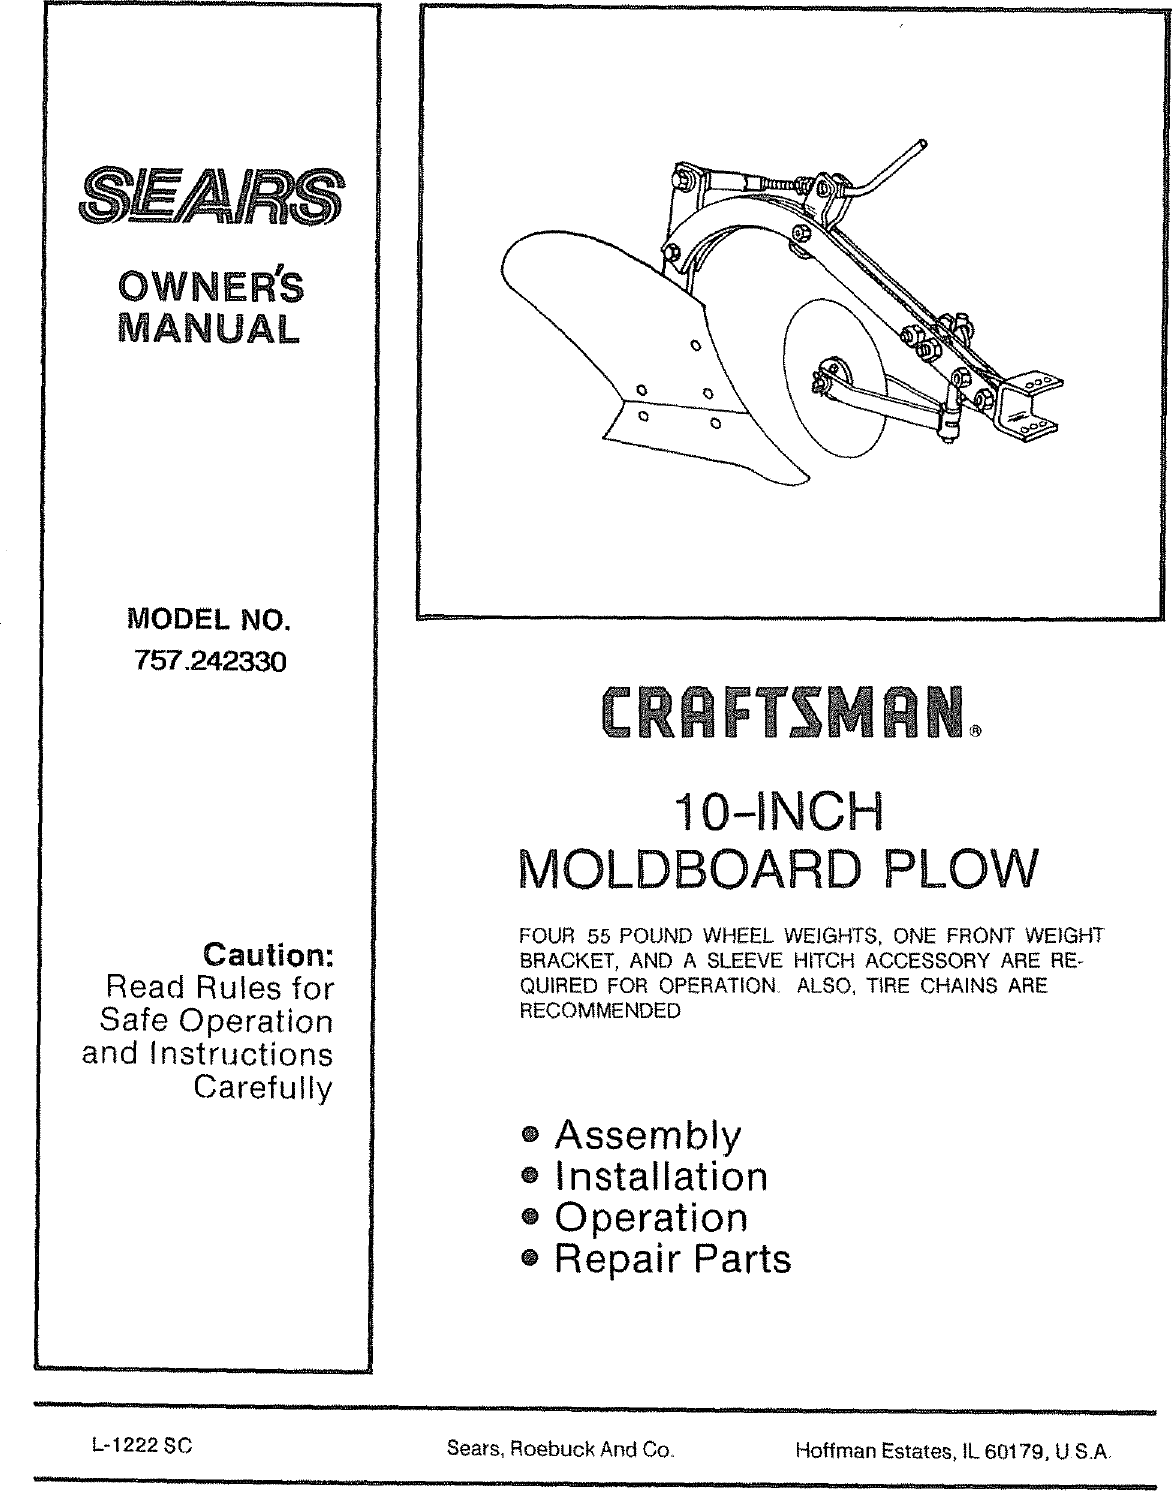 Page 1 of 11 - Craftsman 757242330 User Manual  MOLDBOARD PLOW - Manuals And Guides L0804480